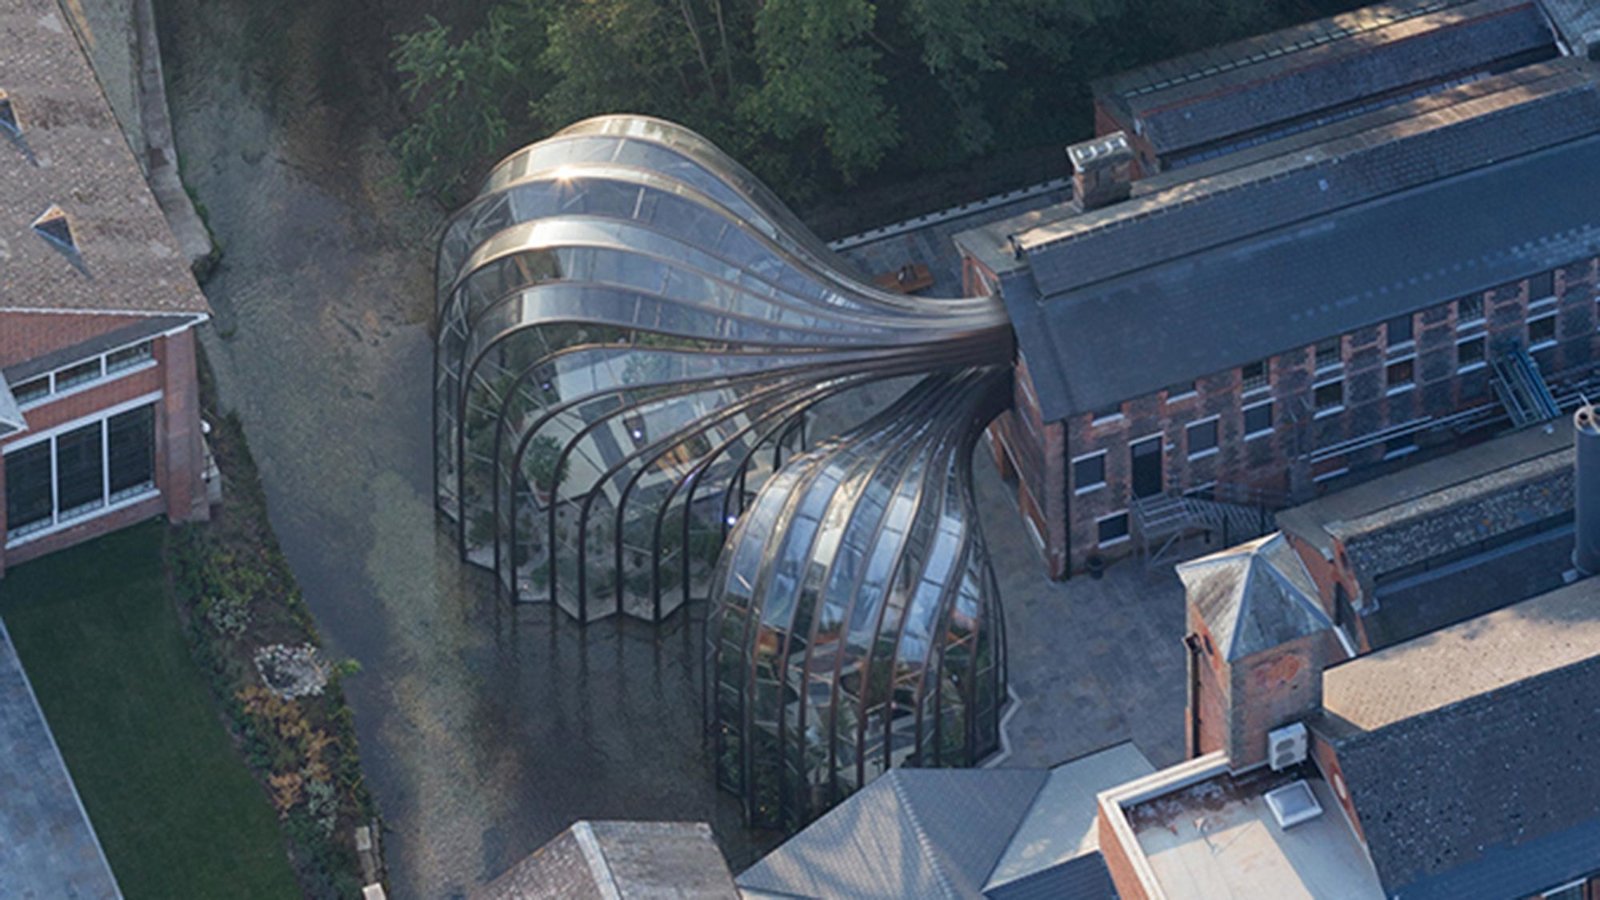 The distillery and visitor centre viewed from above